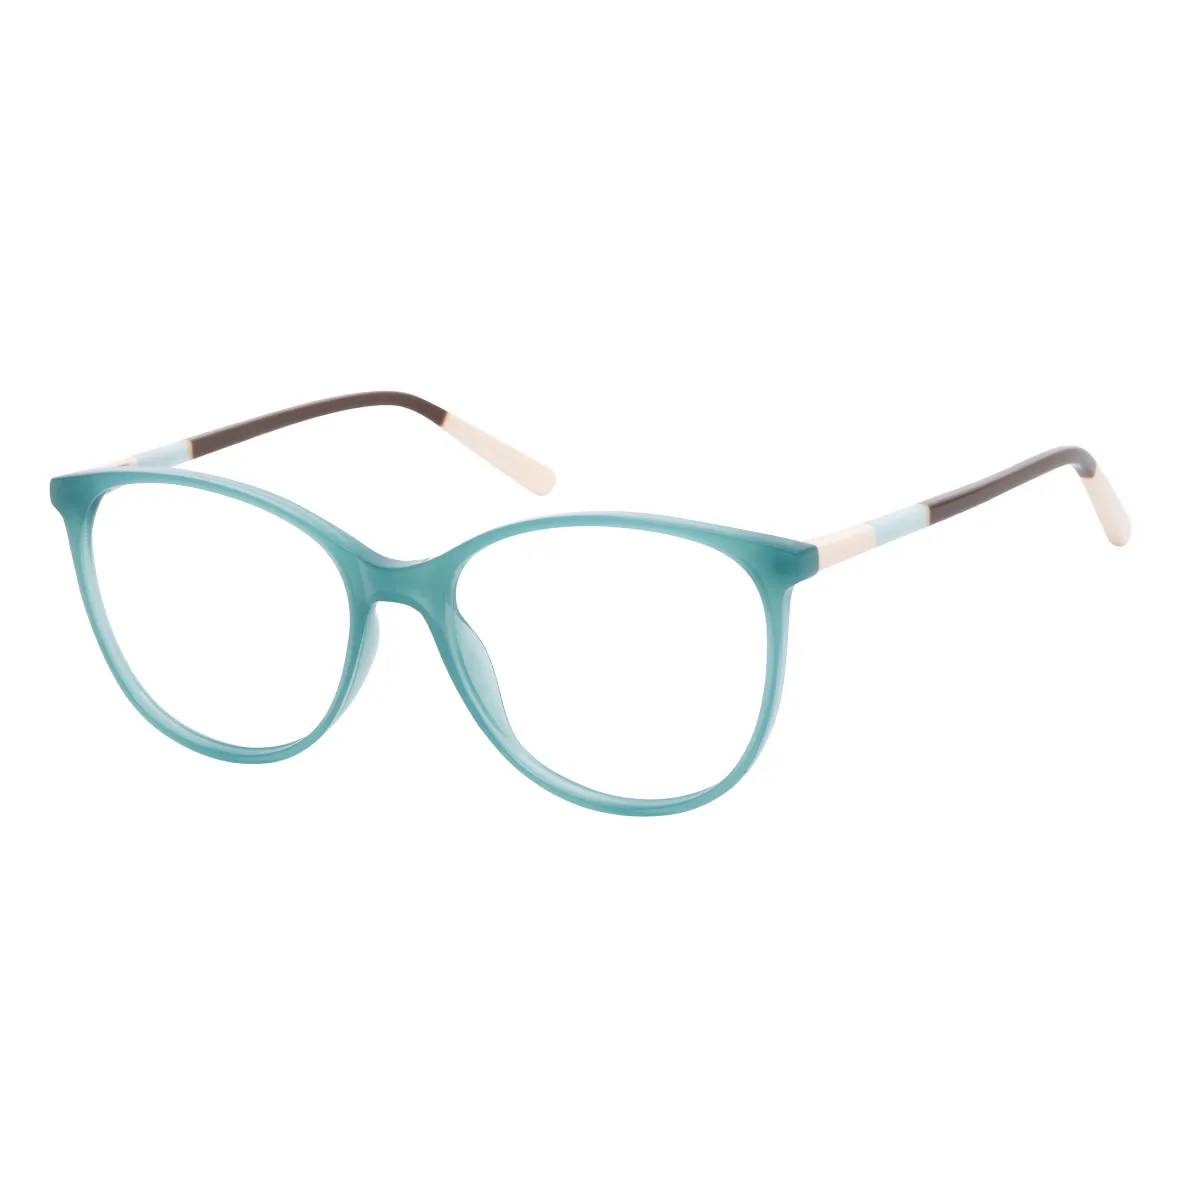 Vicky - Round Blue Glasses for Women